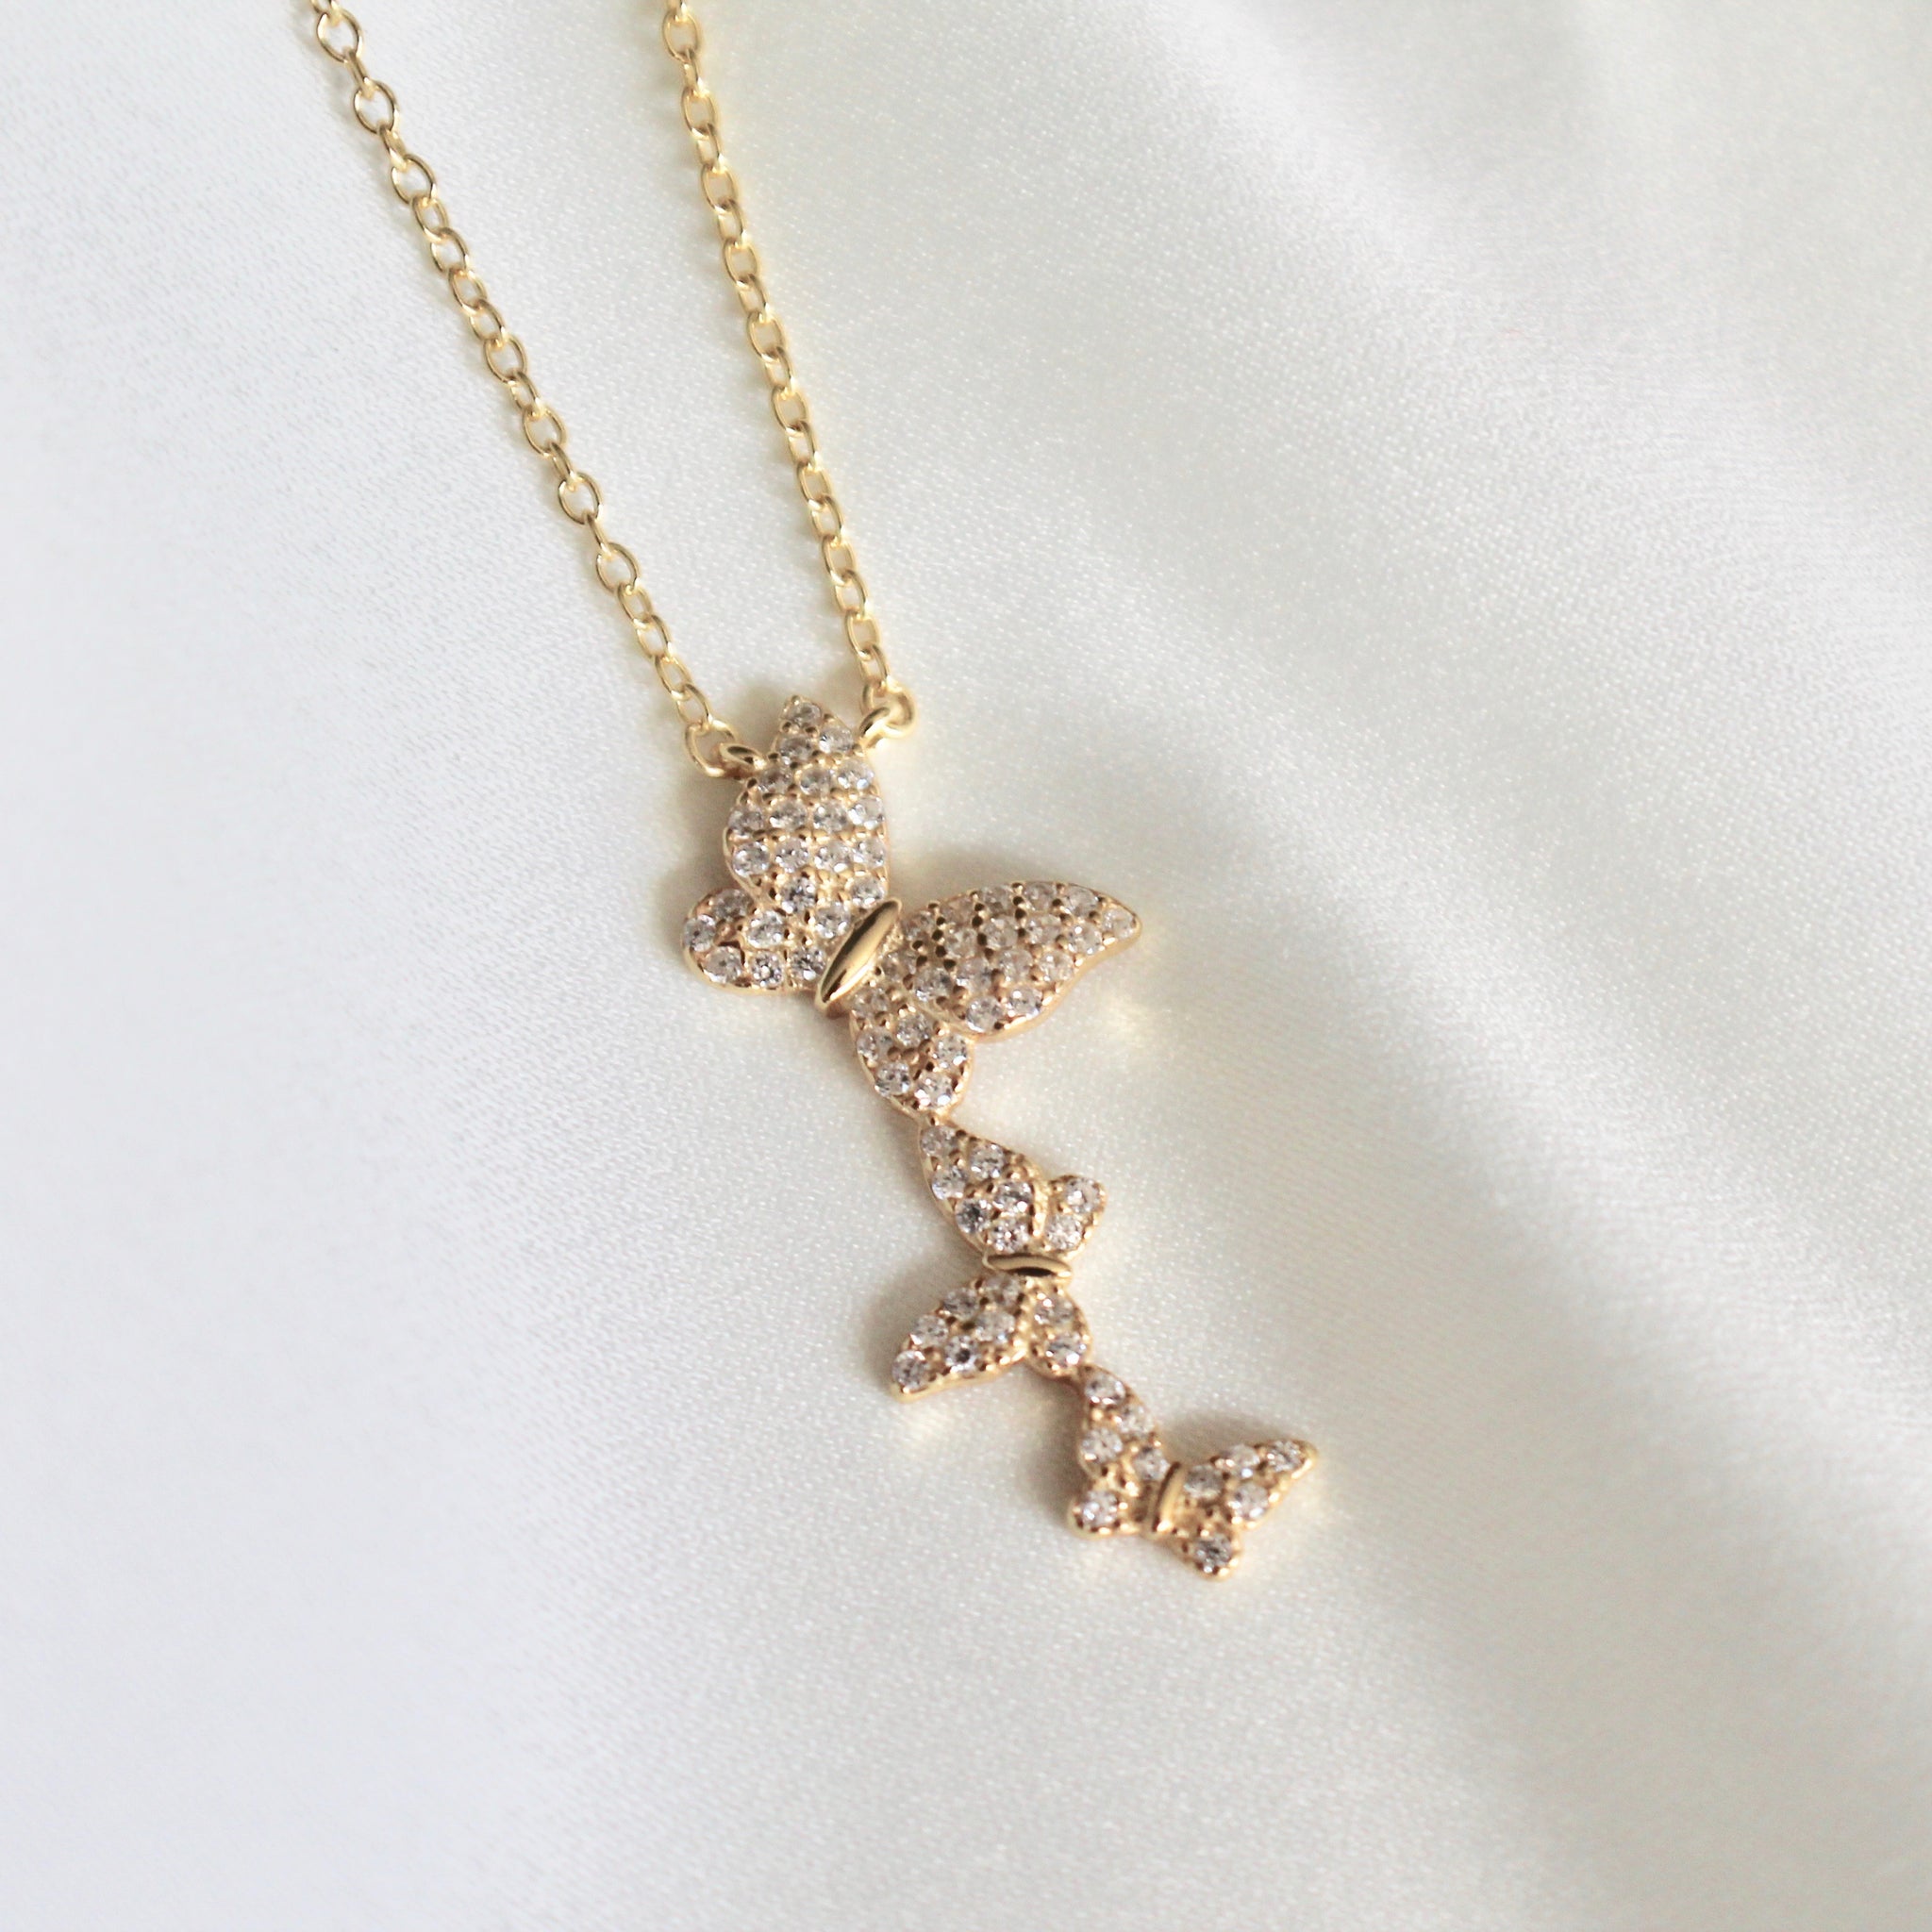 Butterfly drop necklace